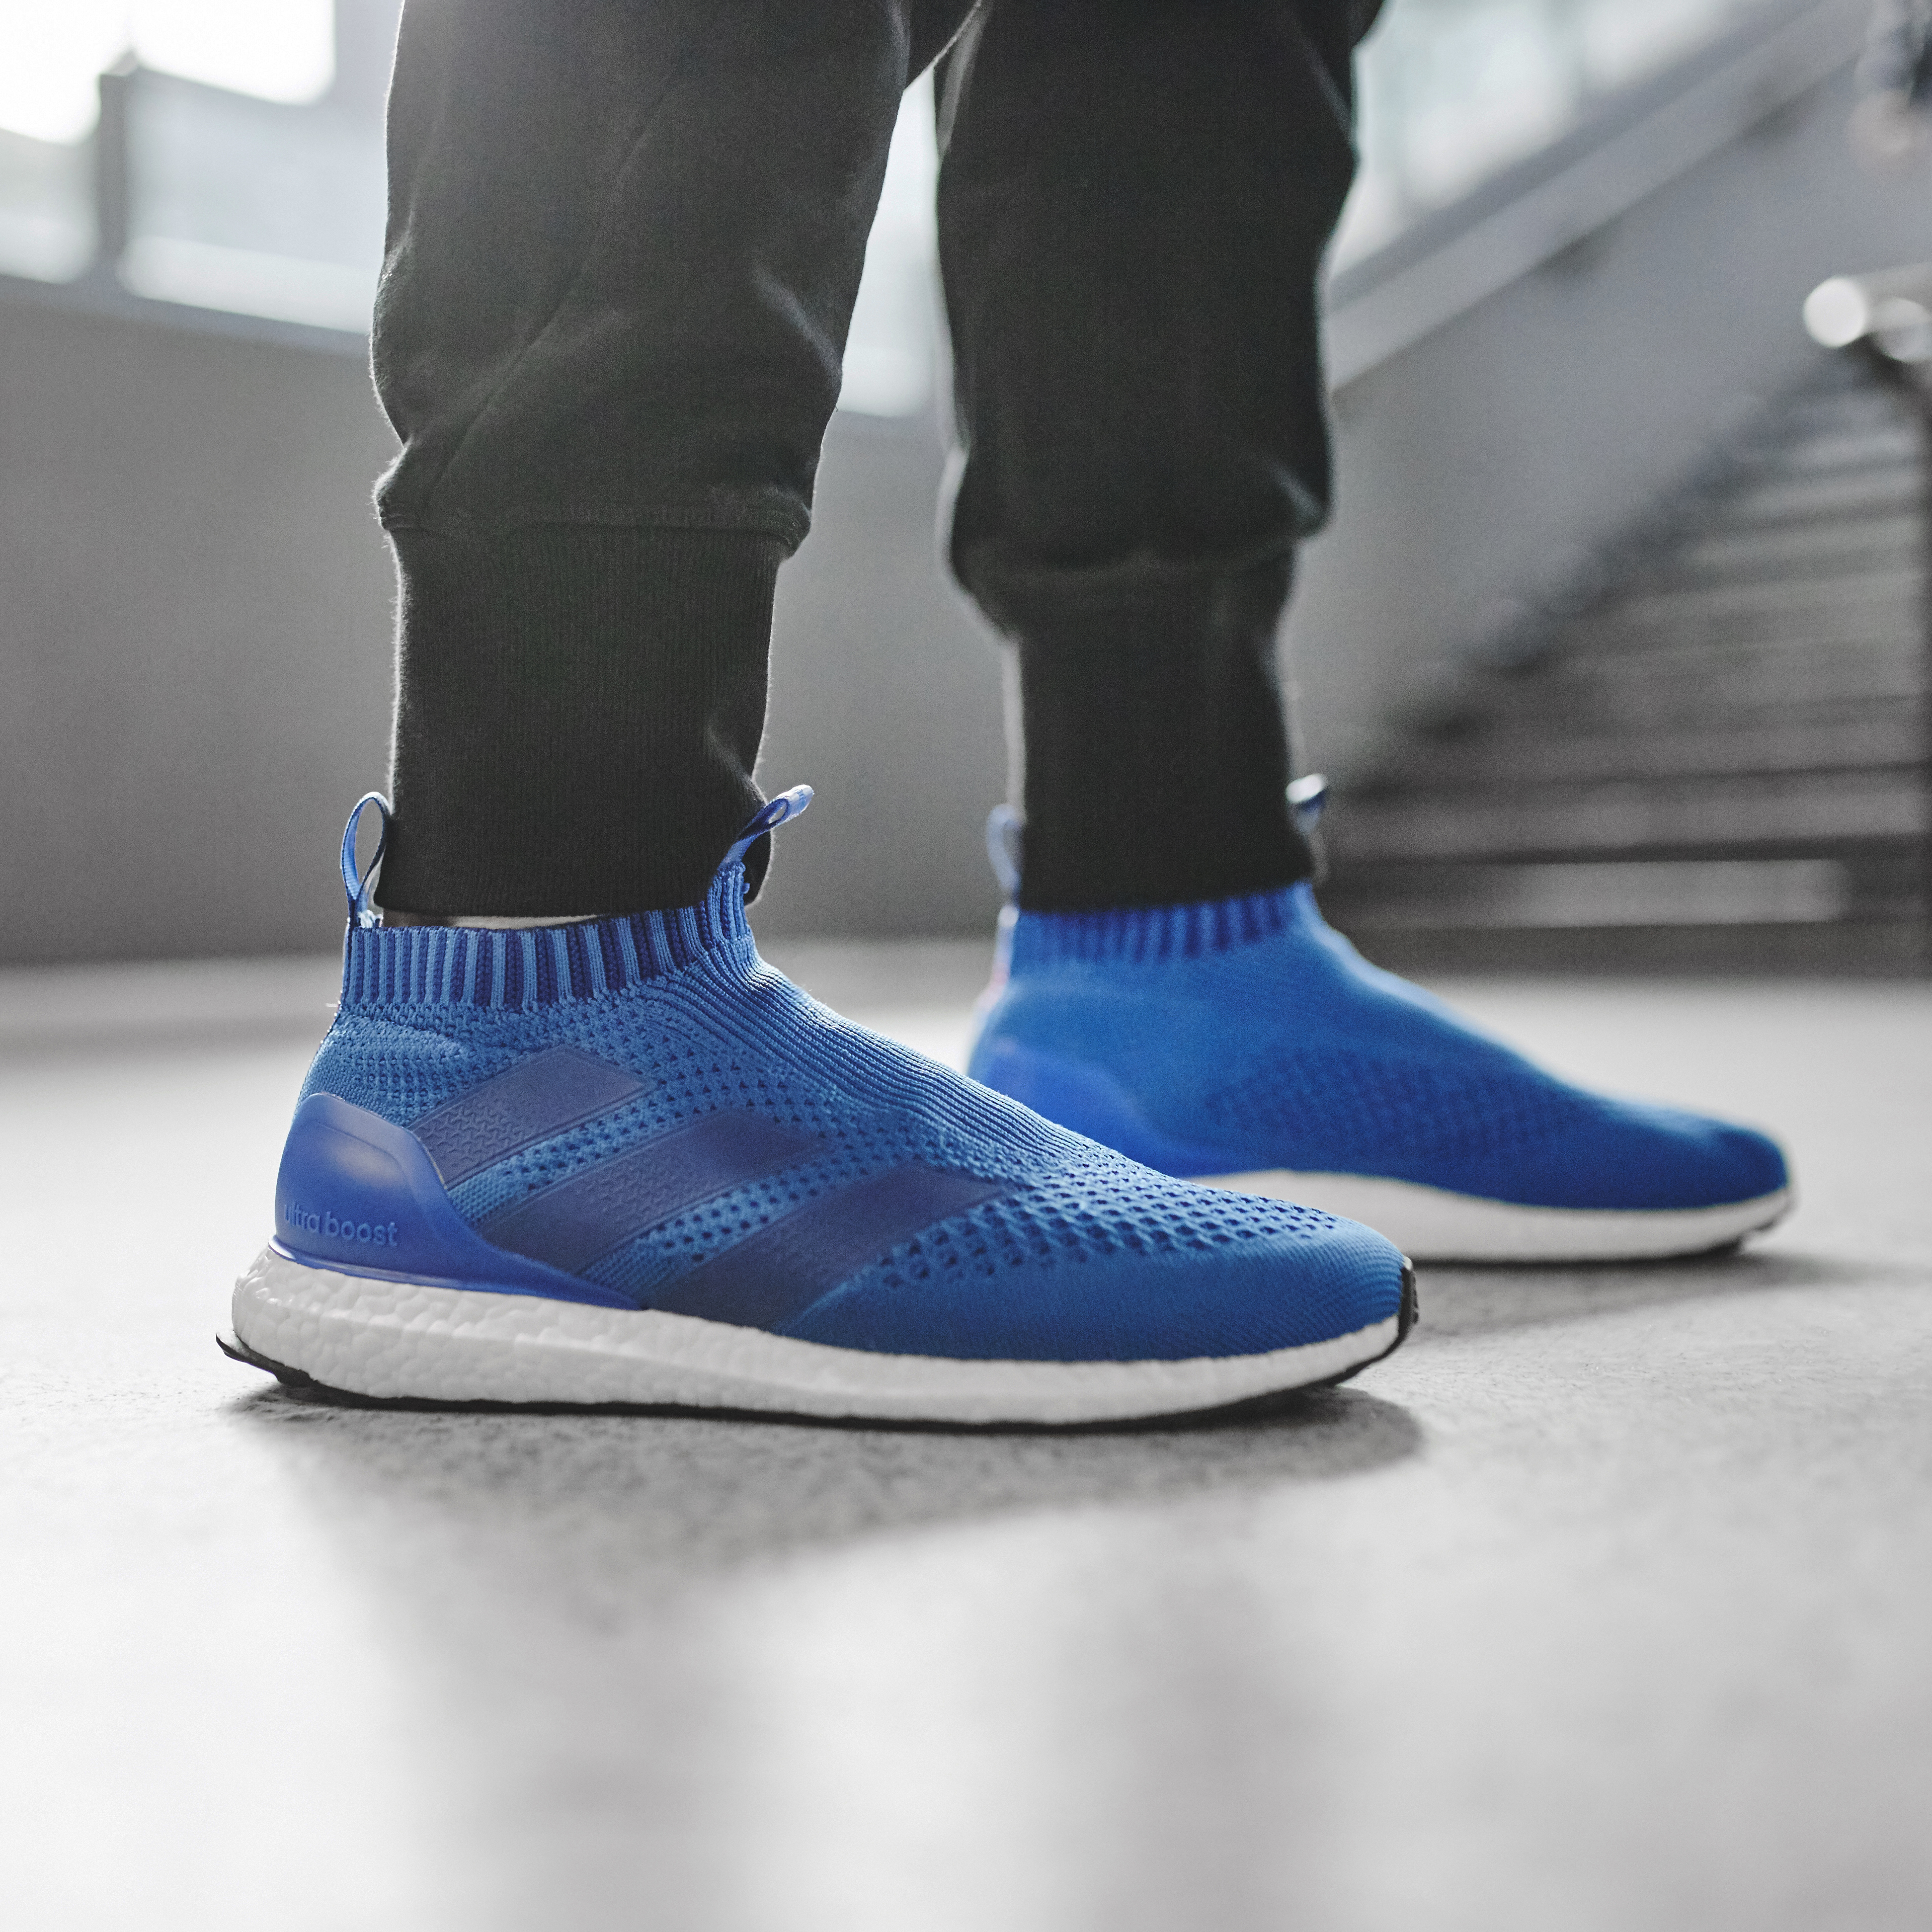 The adidas ACE 16+ Ultra Boost Blue Blast Is Available Now ...